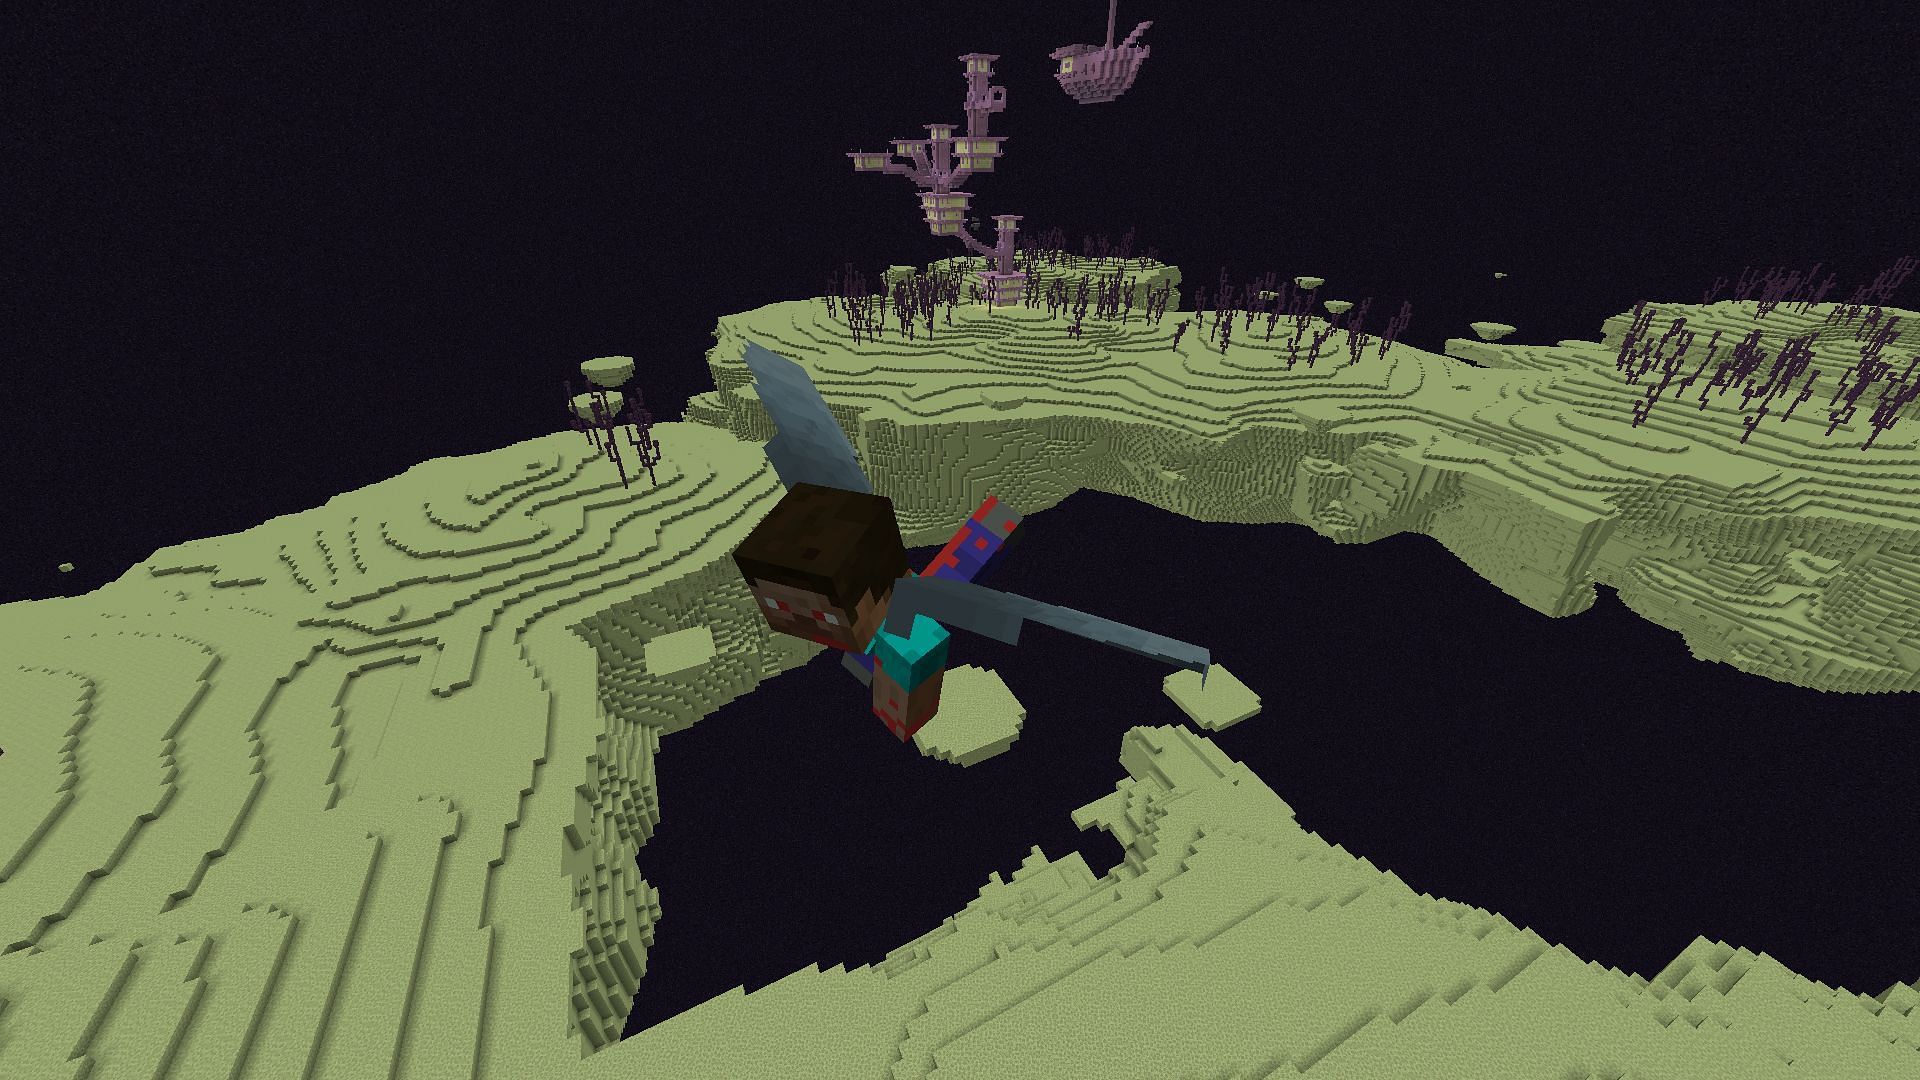 The best way to travel in the End Realm is with an Elytra in Minecraft (Image via Mojang)